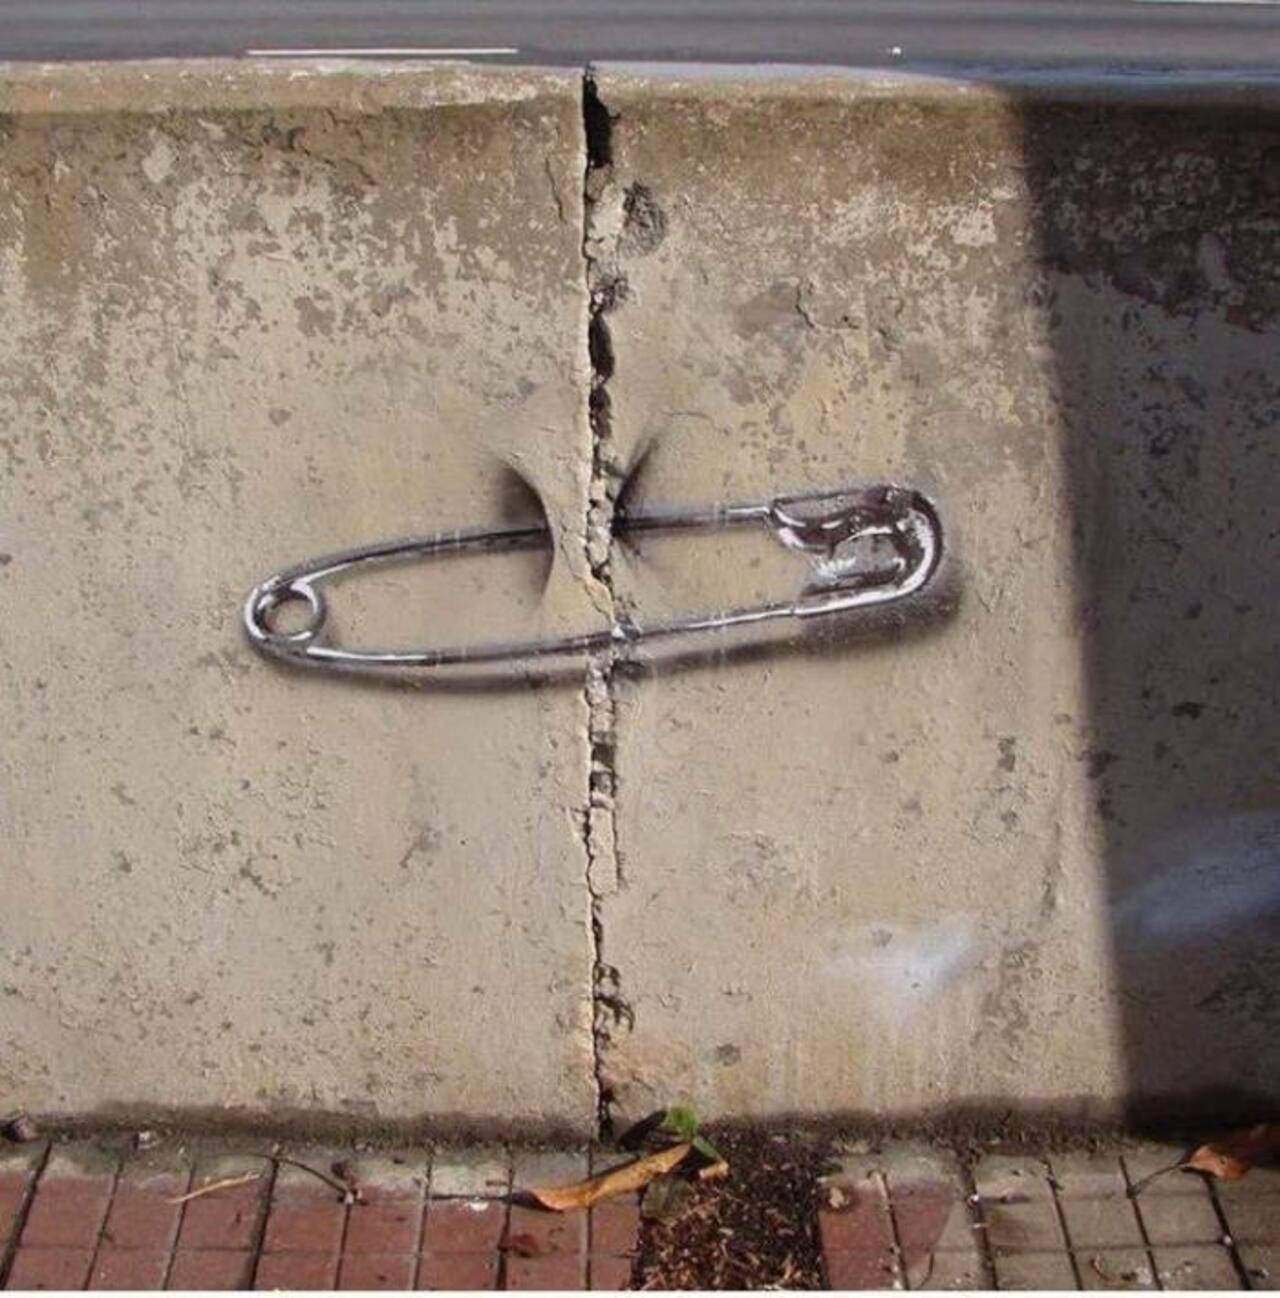 Simple & Beauty – #Creative #Streetart | Be ▲rtist - Be ▲rt https://beartistbeart.com/2016/08/25/simple-beauty-creative-streetart/?utm_campaign=crowdfire&utm_content=crowdfire&utm_medium=social&utm_source=twitter https://t.co/WxCyH0oRa6